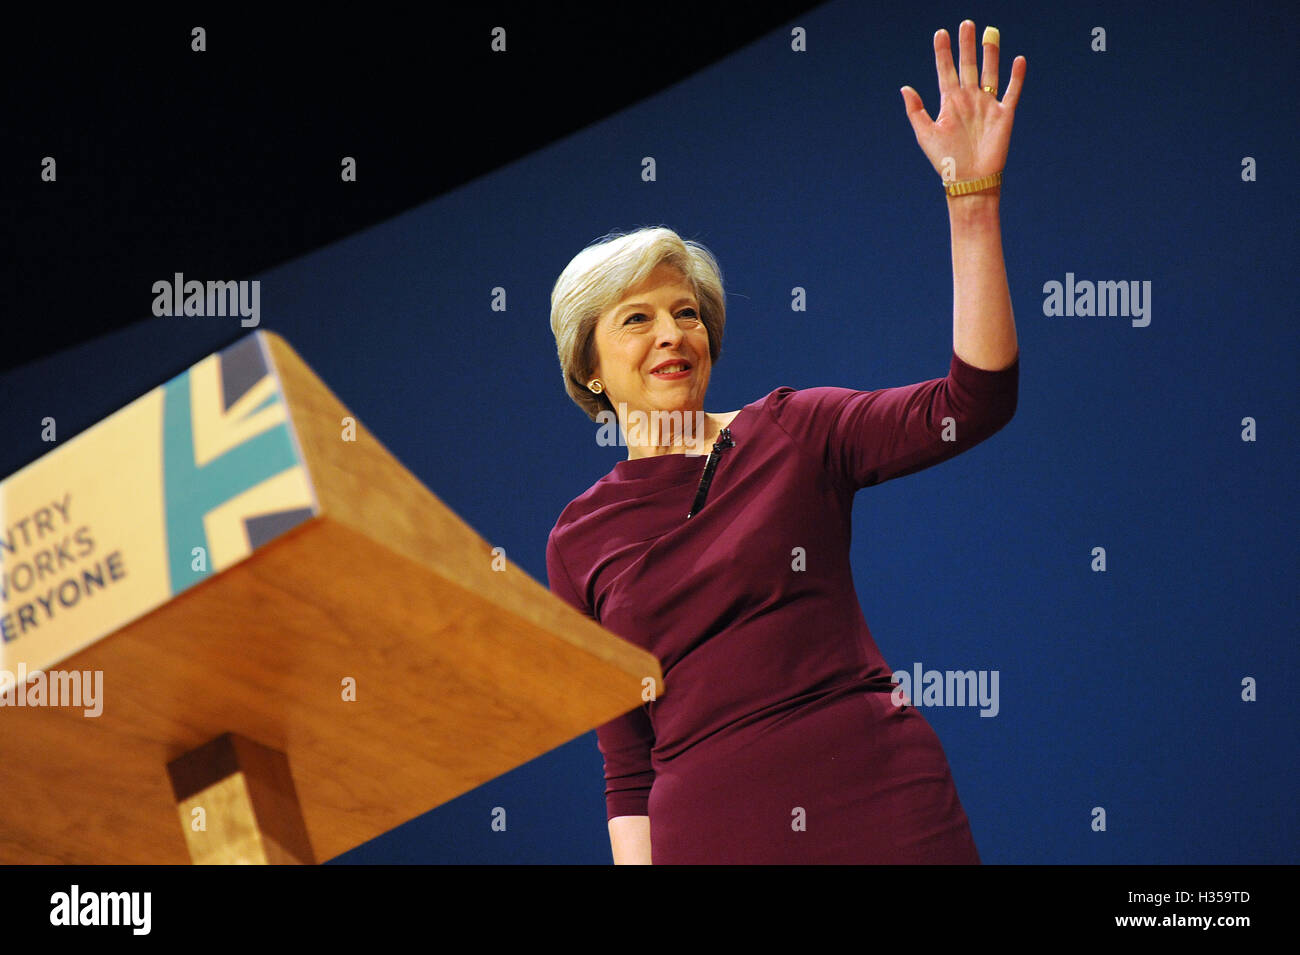 Birmingham, UK. 5th Oct, 2016. Theresa May, Prime Minister and Leader of the Conservative Party walks onto the stage to deliver her speech to conference, on the fourth and final day of the Conservative Party Conference at the ICC Birmingham. The theme of the speech was 'A Country that Works for Everyone'. This conference follows the referendum decision for the UK to leave the European Union, and the subsequent election of Theresa May as leader of the Conservative Party. Credit:  Kevin Hayes/Alamy Live News Stock Photo